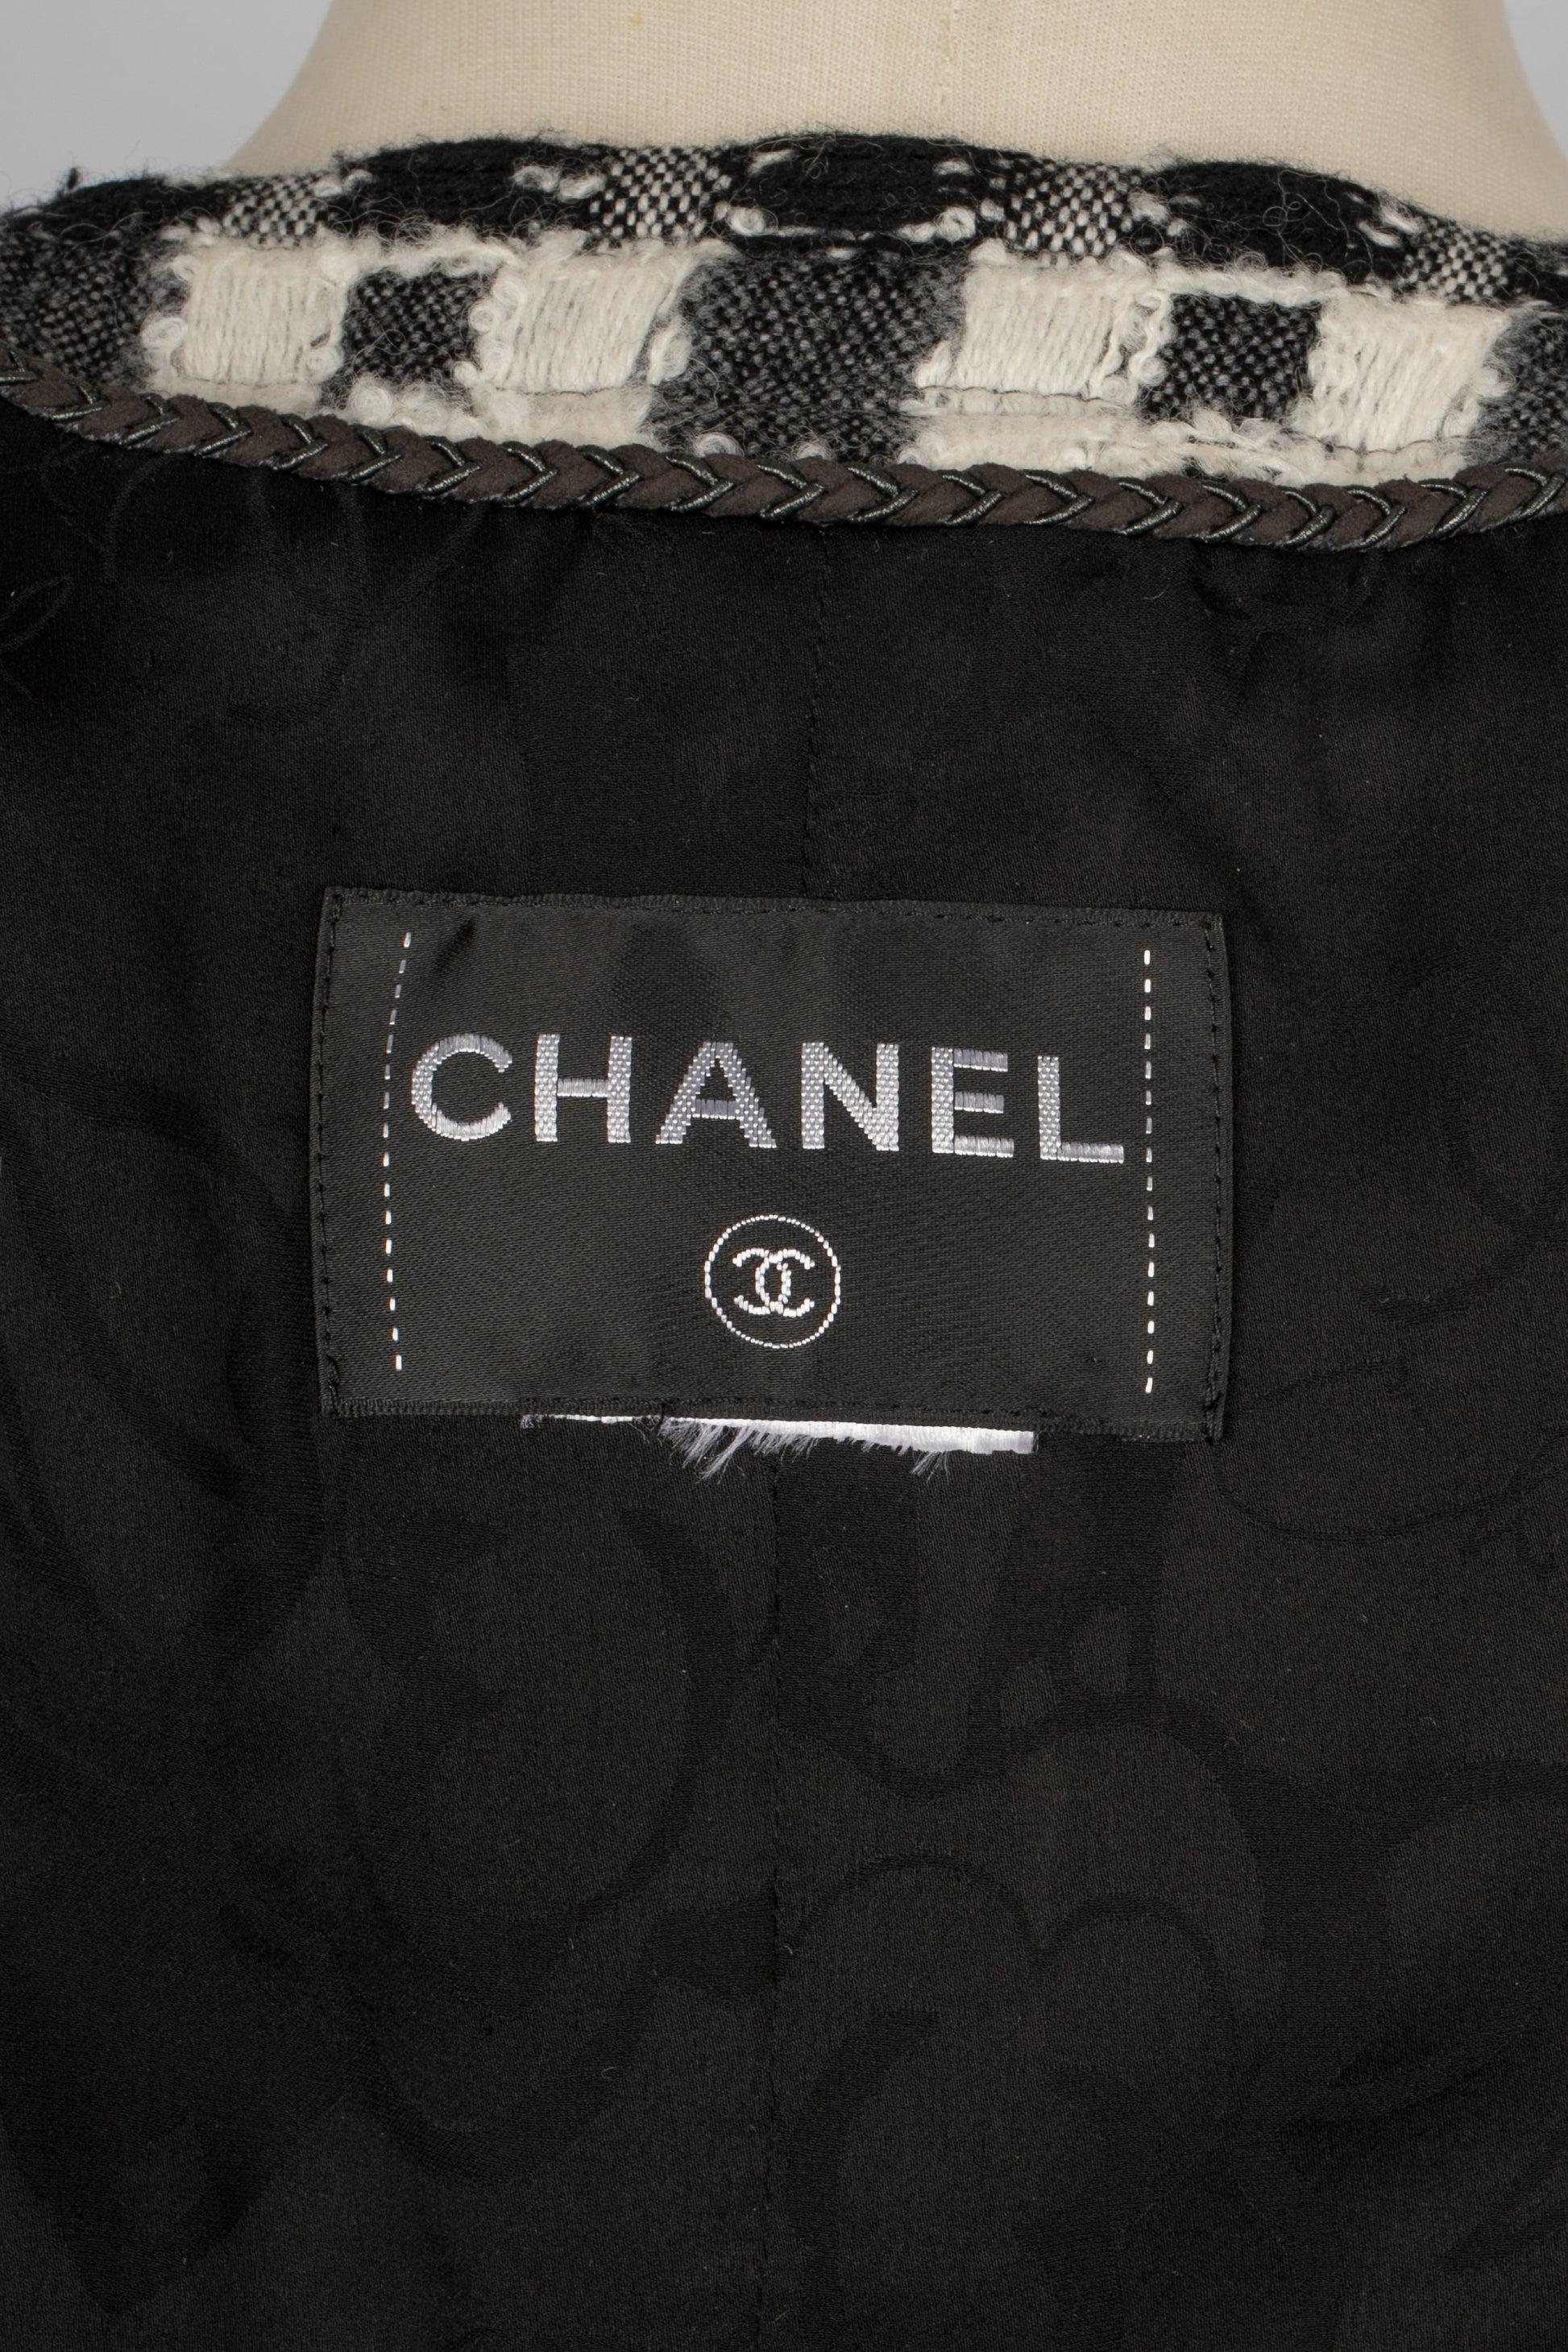 Chanel Short Jacket in Black and White Tweed, Silk Lining 5